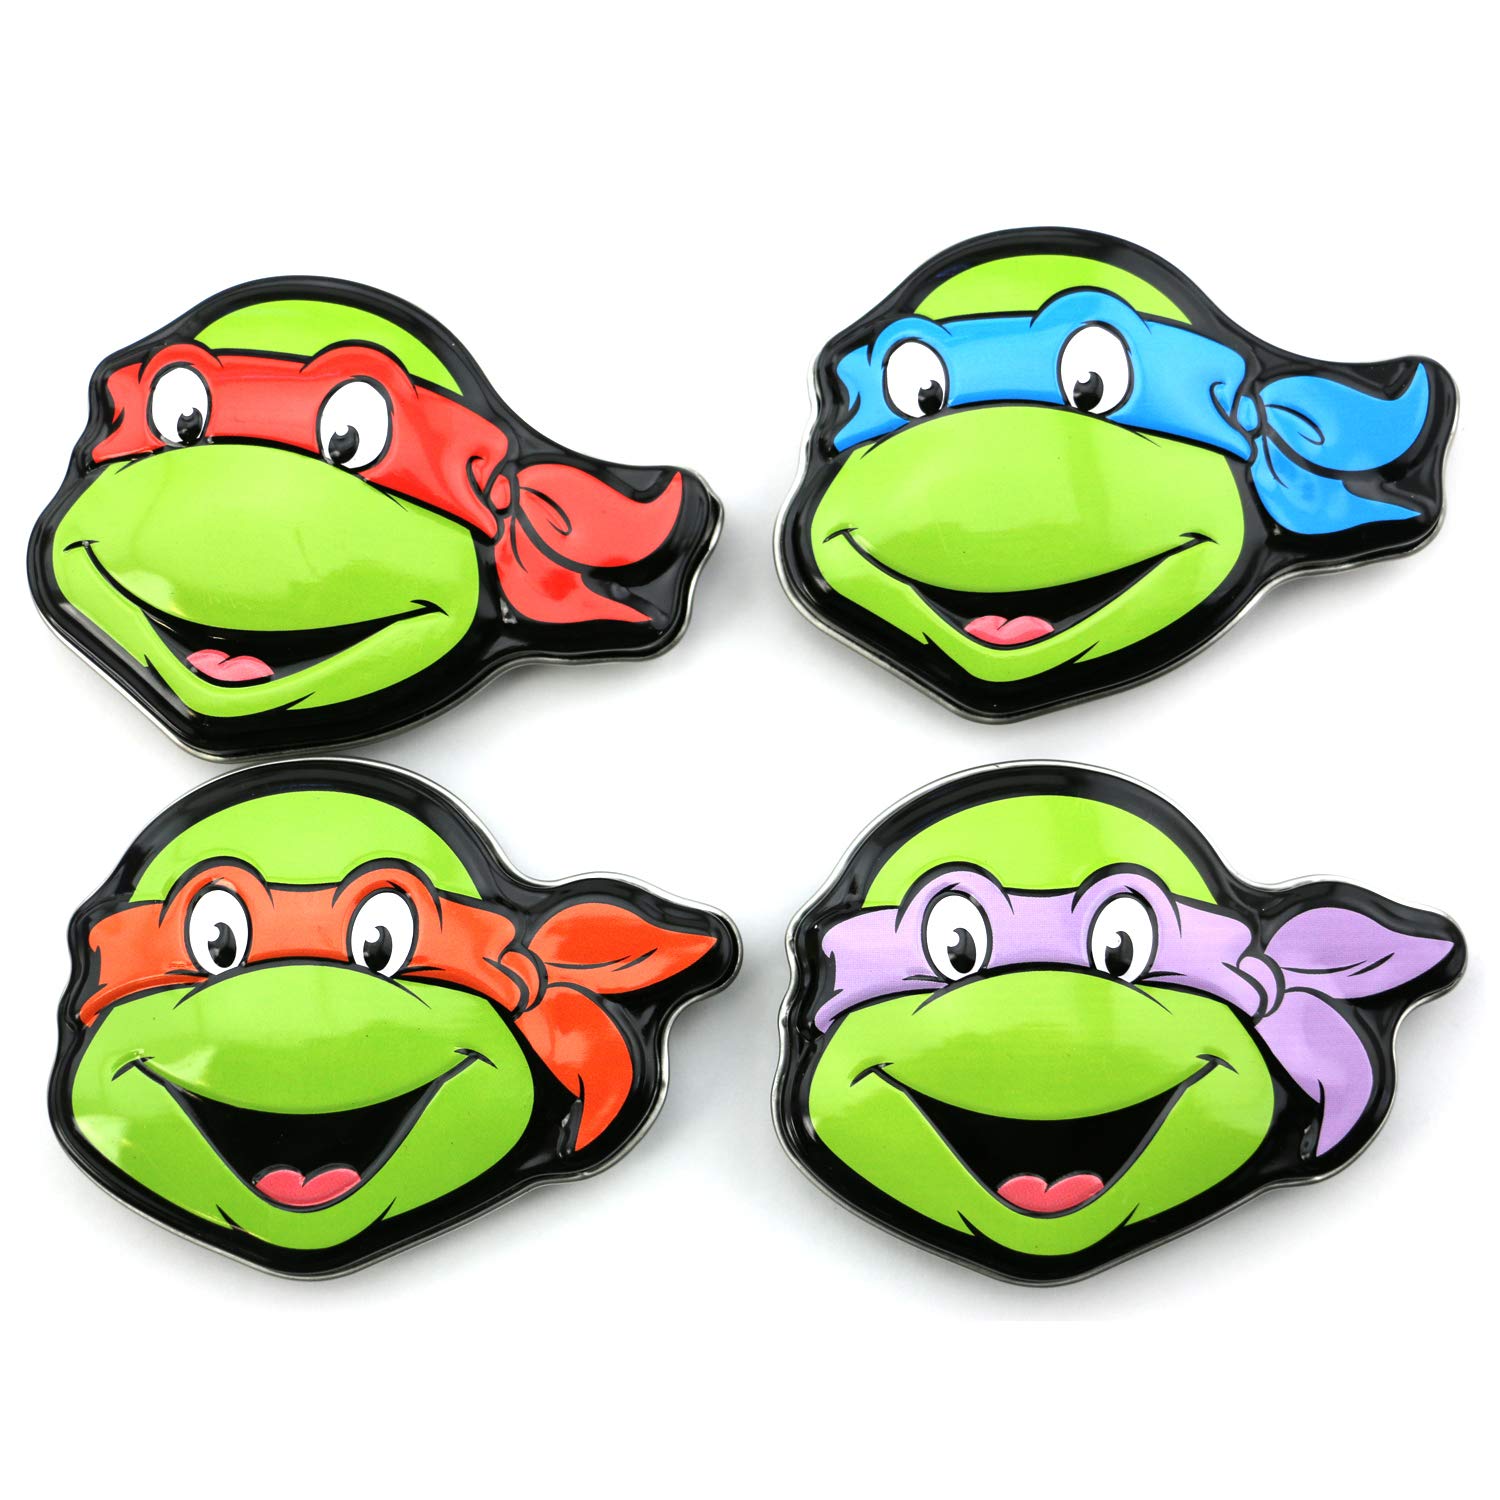 Teenage Mutant Ninja Turtles Tin Candy (4 Pack) Watermelon Flavor TMNT Shell Sours Gift Stuffers with 2 GosuToys Stickers